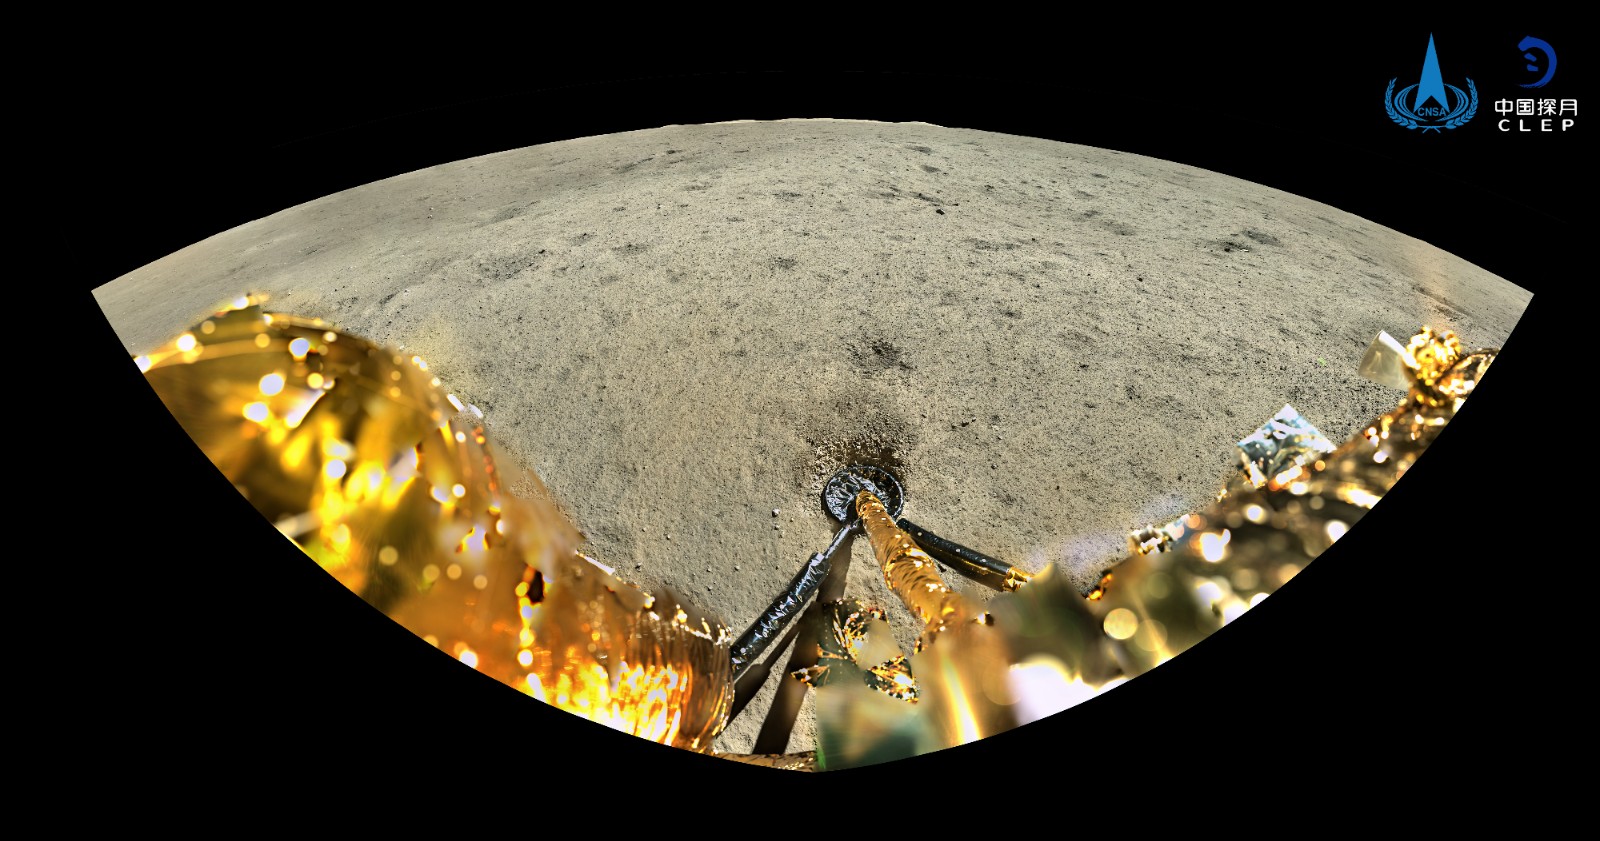 An image of the surface of the far side of the moon captured by the panoramic camera on the lander of China's Chang'e-6 probe. /CNSA